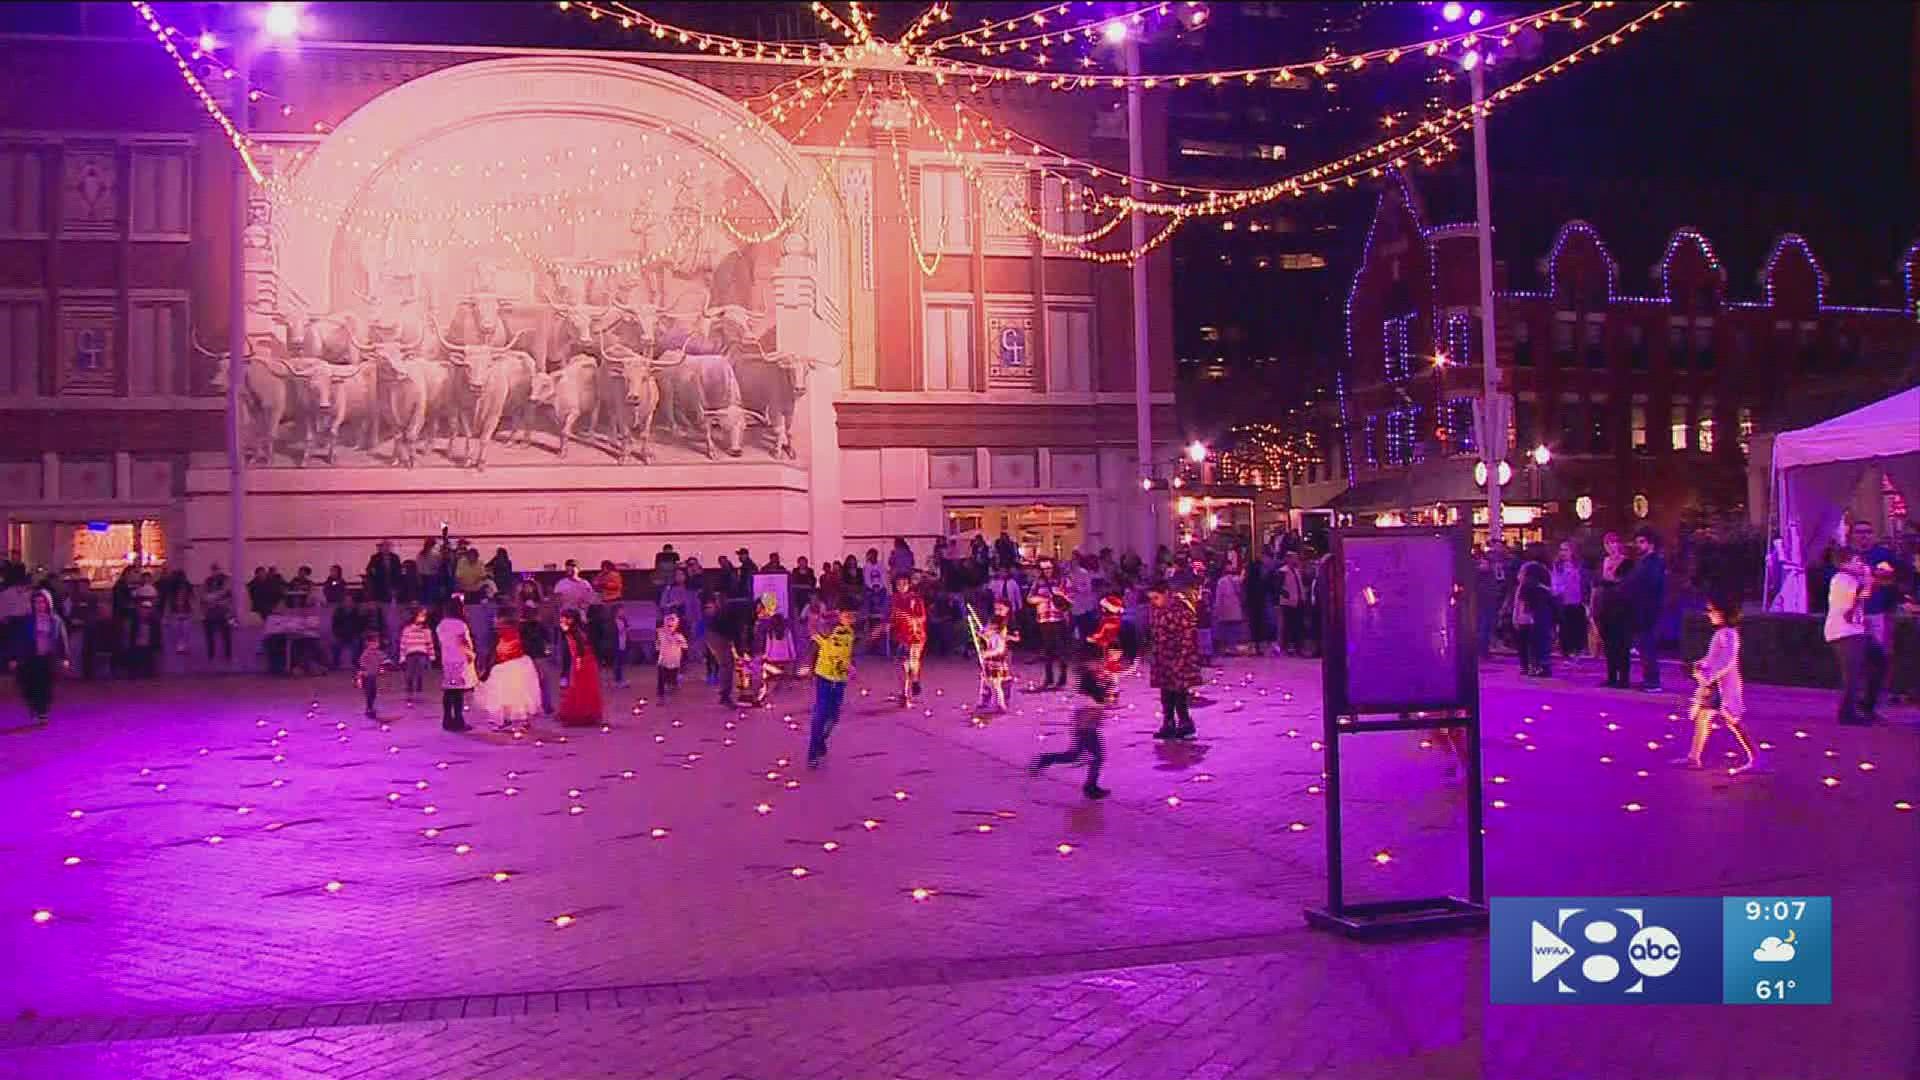 For the first time since 2020, the New Year's Eve fireworks show is making a comeback in Fort Worth's Sundance Square.